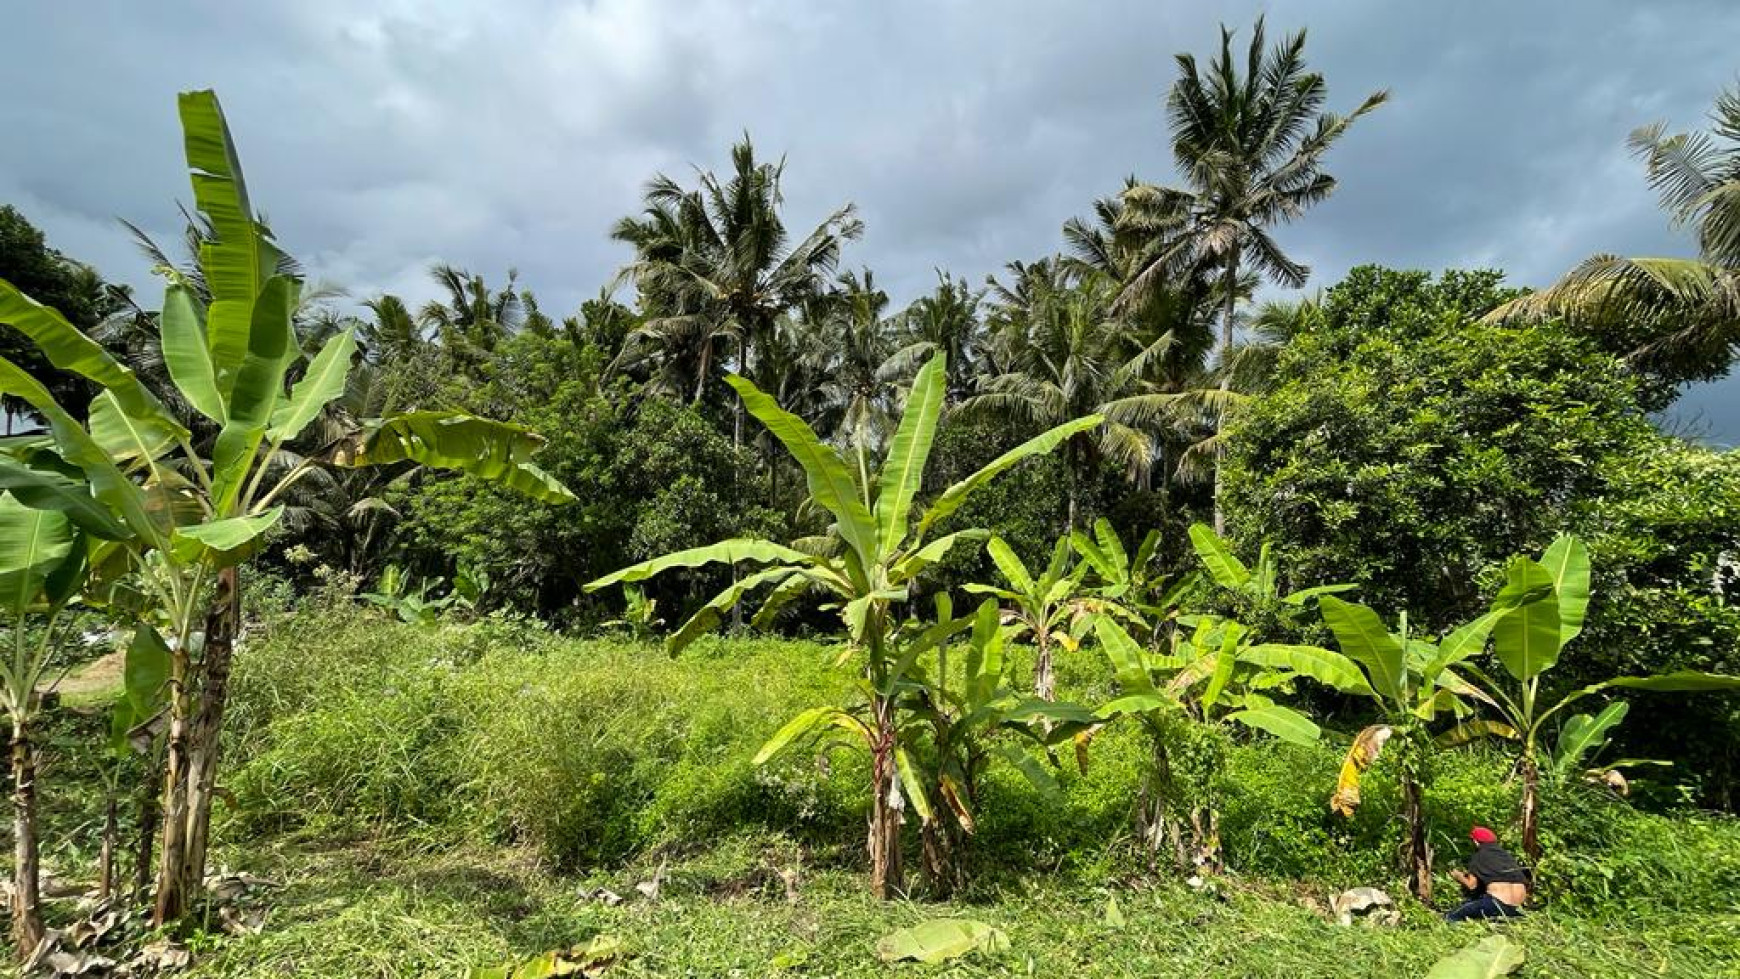 681 sq m Leasehold Land with Jungle View for Sale 5 Minutes from Central Ubud